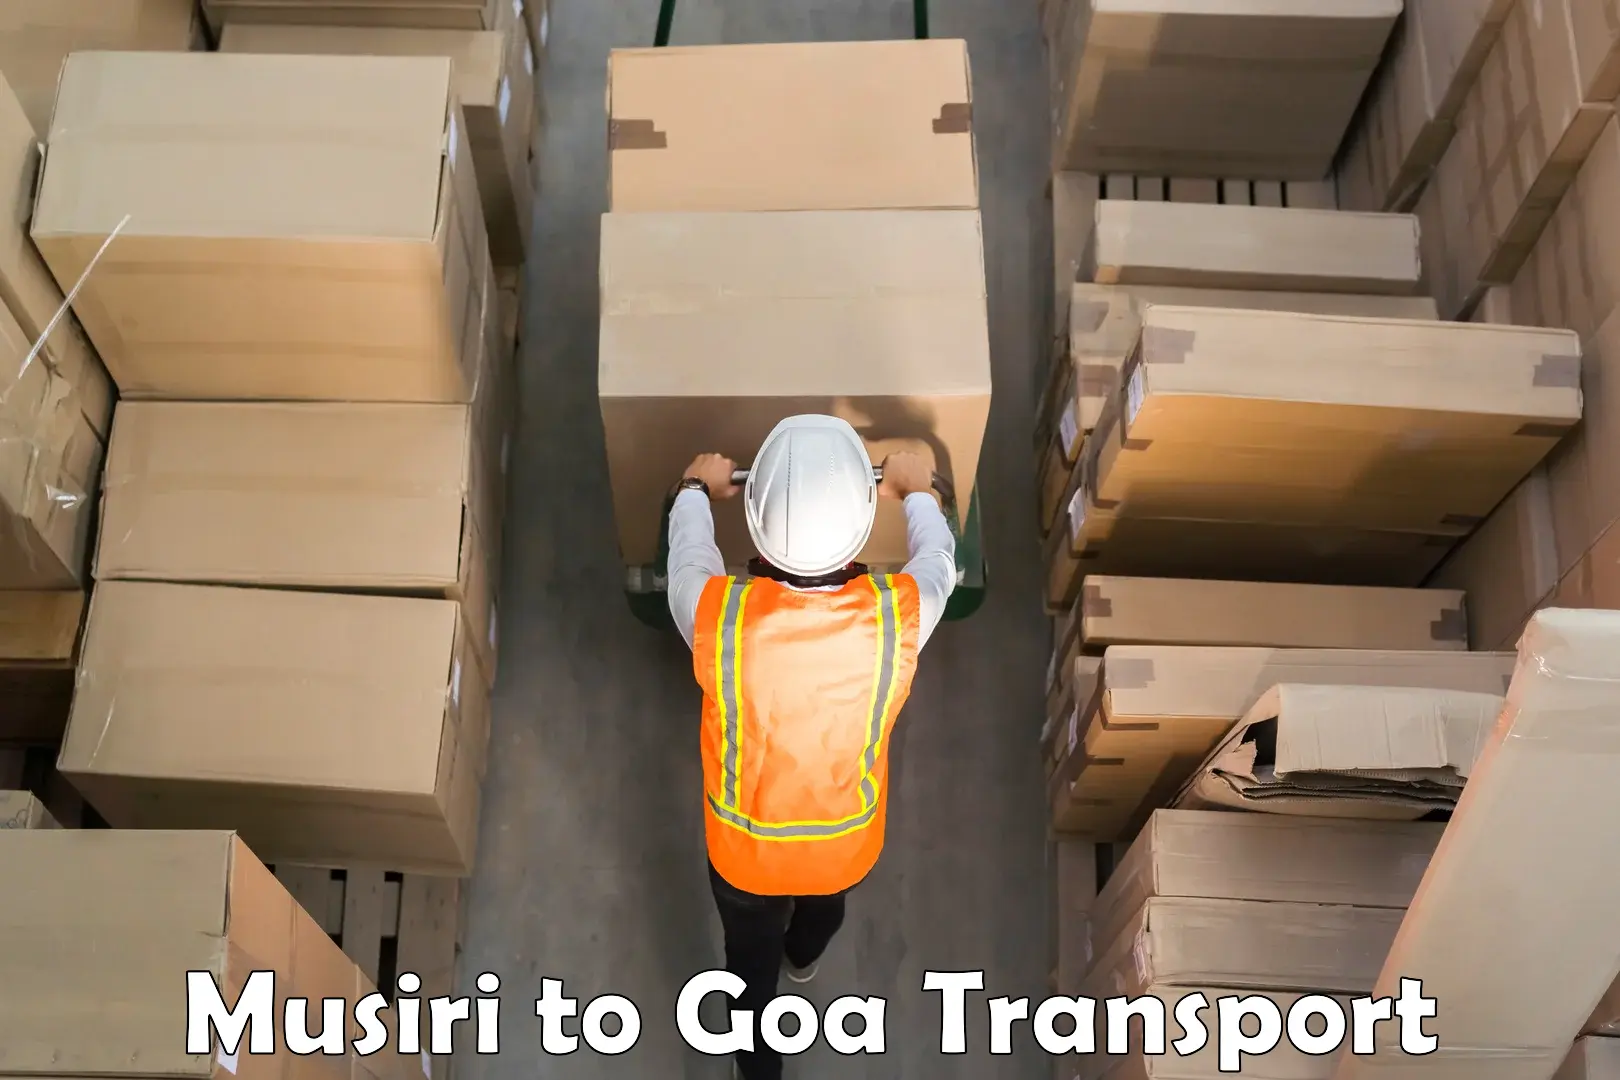 Transport bike from one state to another Musiri to IIT Goa